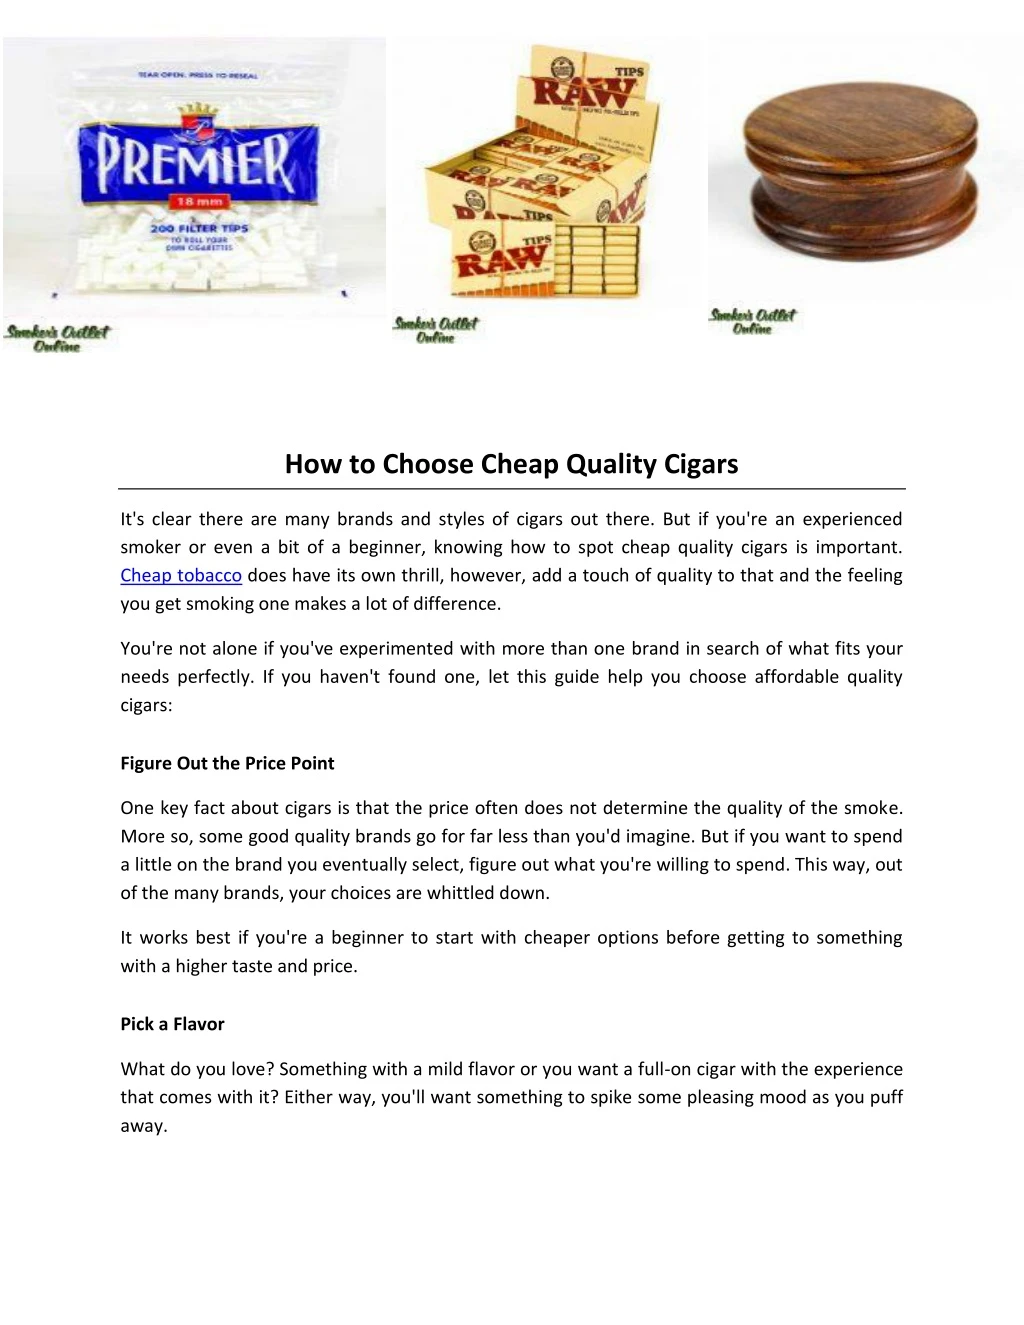 how to choose cheap quality cigars